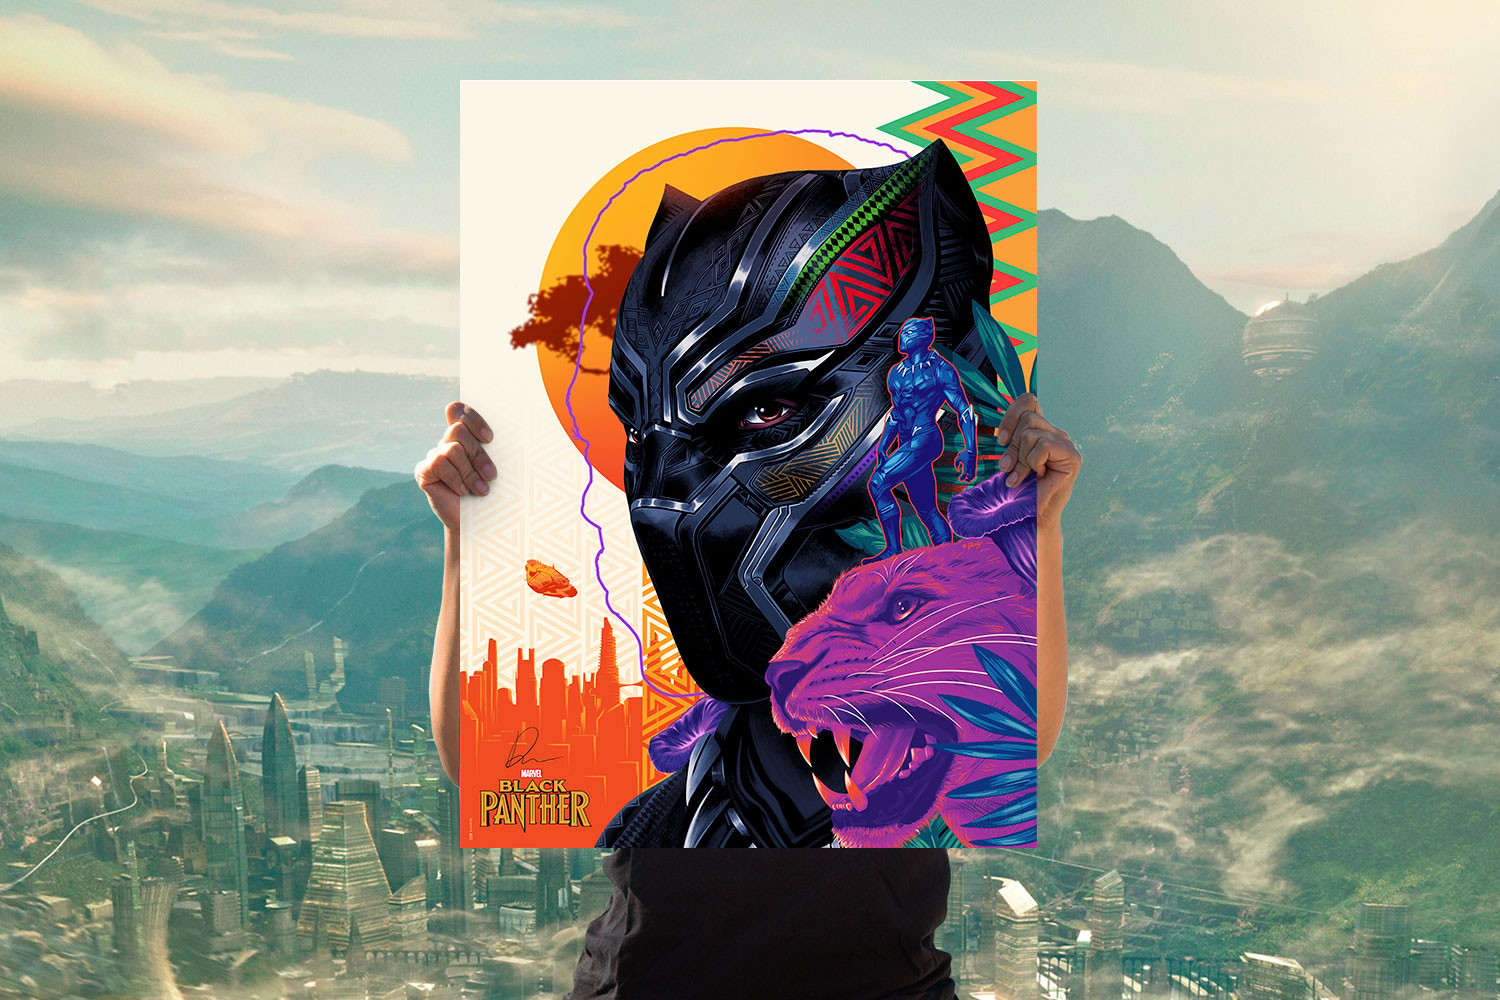 Black Panther: Long Live the King Variant Exclusive Edition 